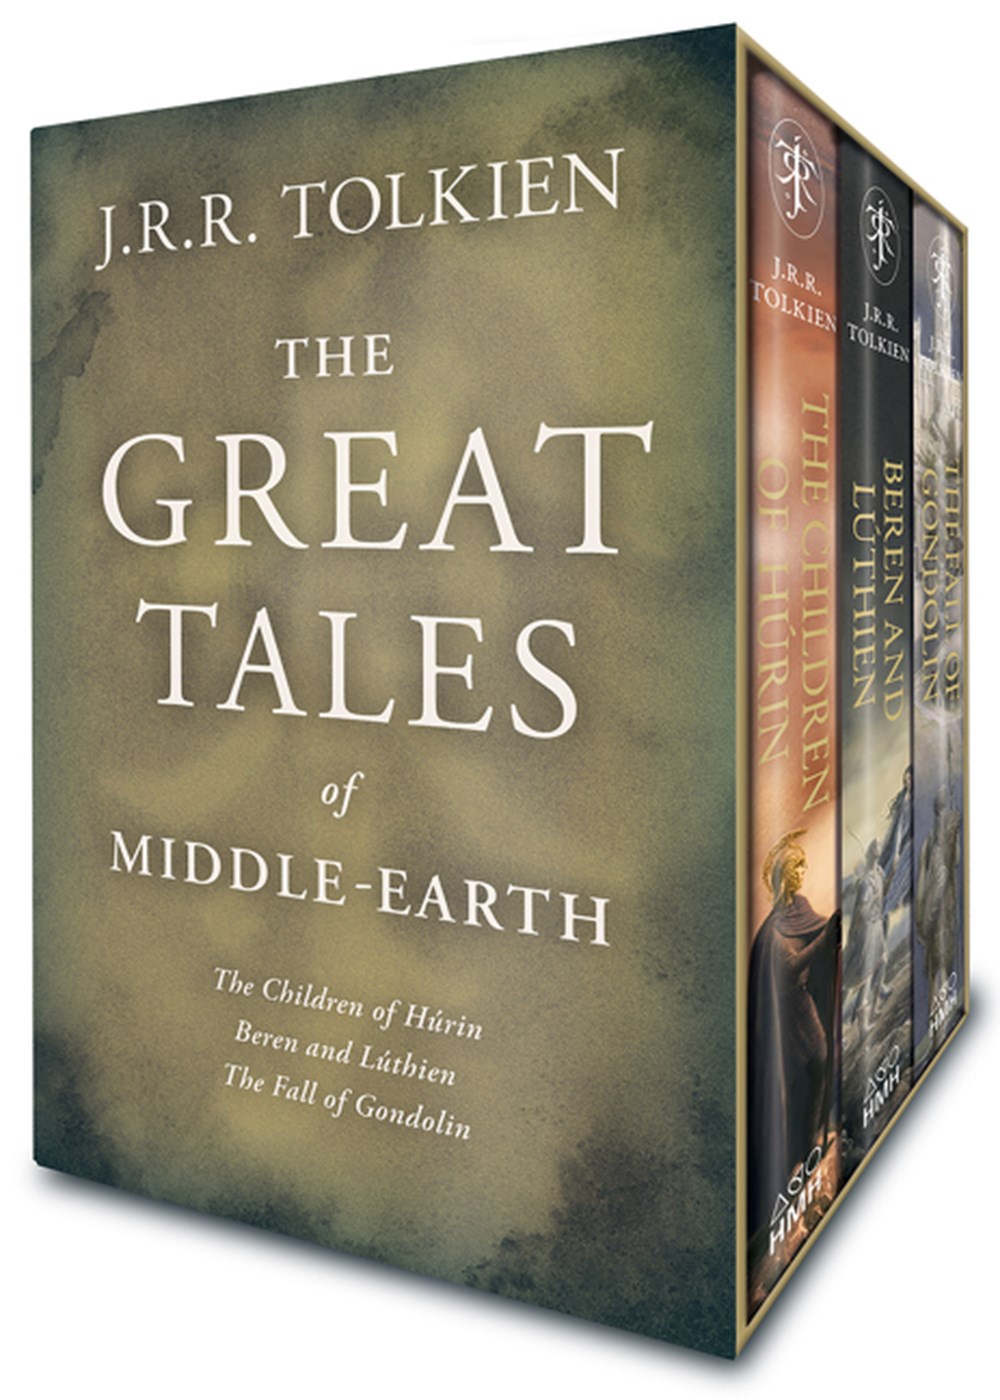 Great Tales of Middle-Earth: The Children of Húrin, Beren and Lúthien, and the Fall of Gondolin